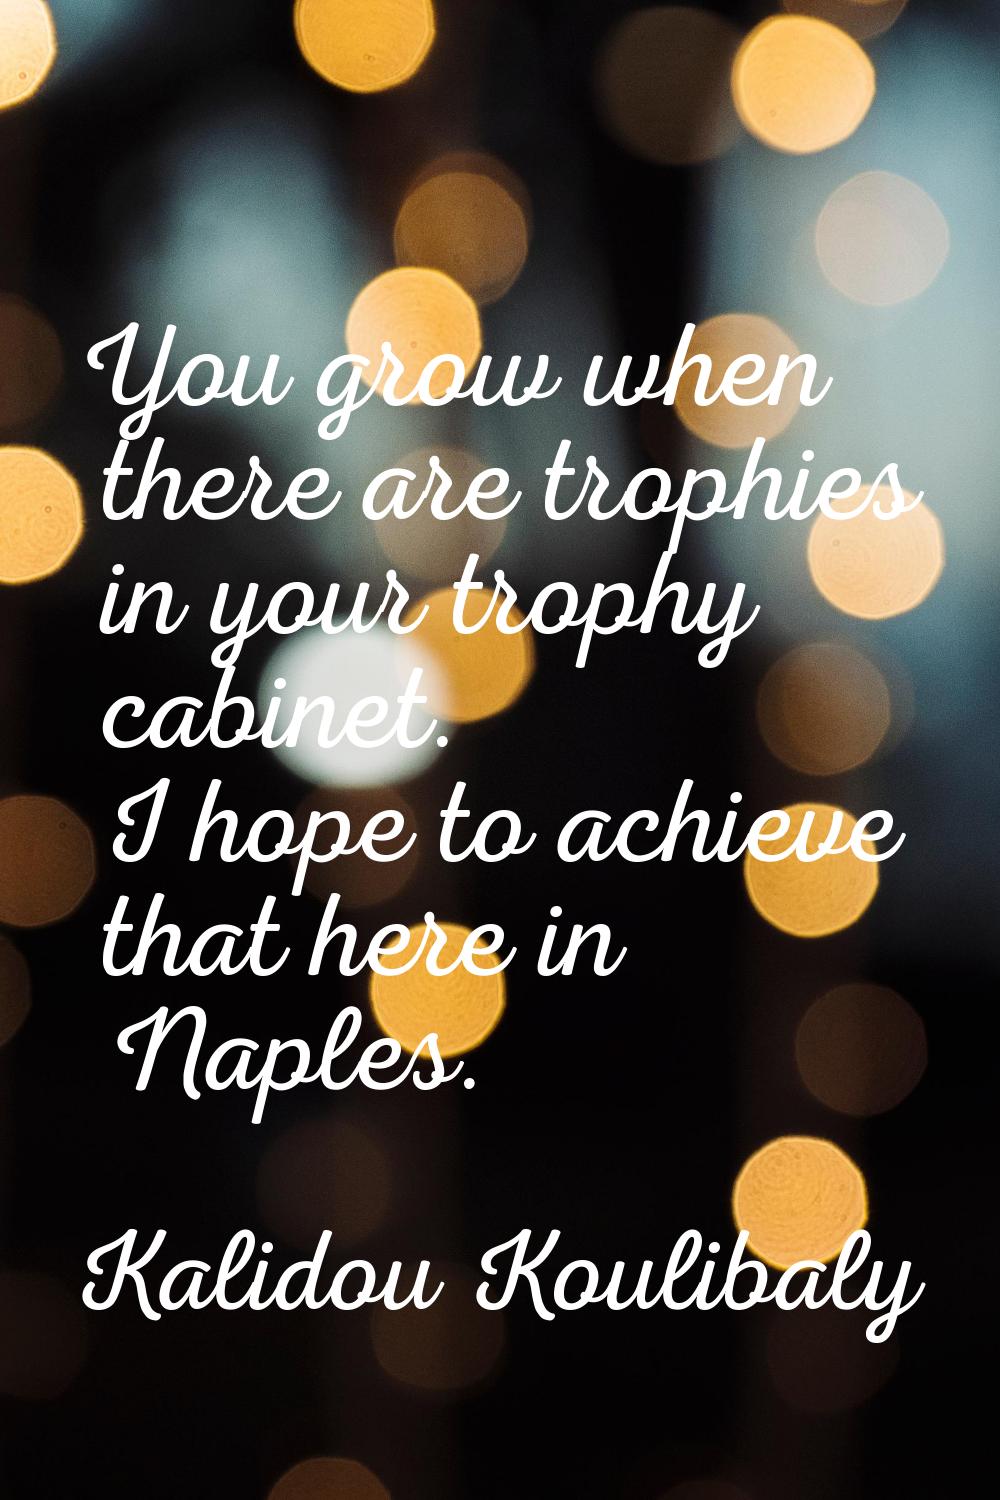 You grow when there are trophies in your trophy cabinet. I hope to achieve that here in Naples.